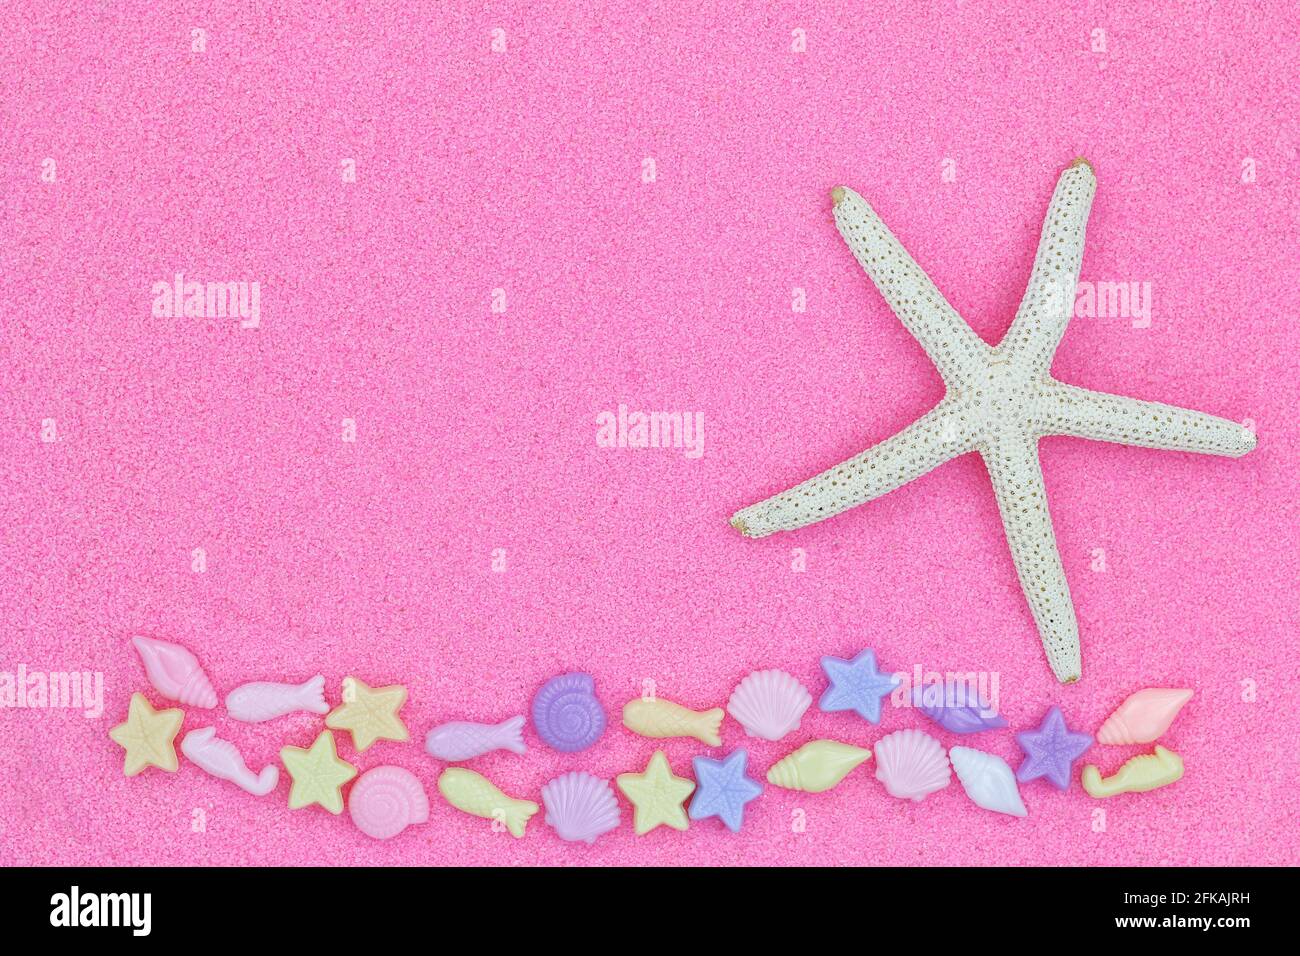 Closeup of star fish, known as sea stars, on pink fine sand beach background decorated with marine life beads Stock Photo